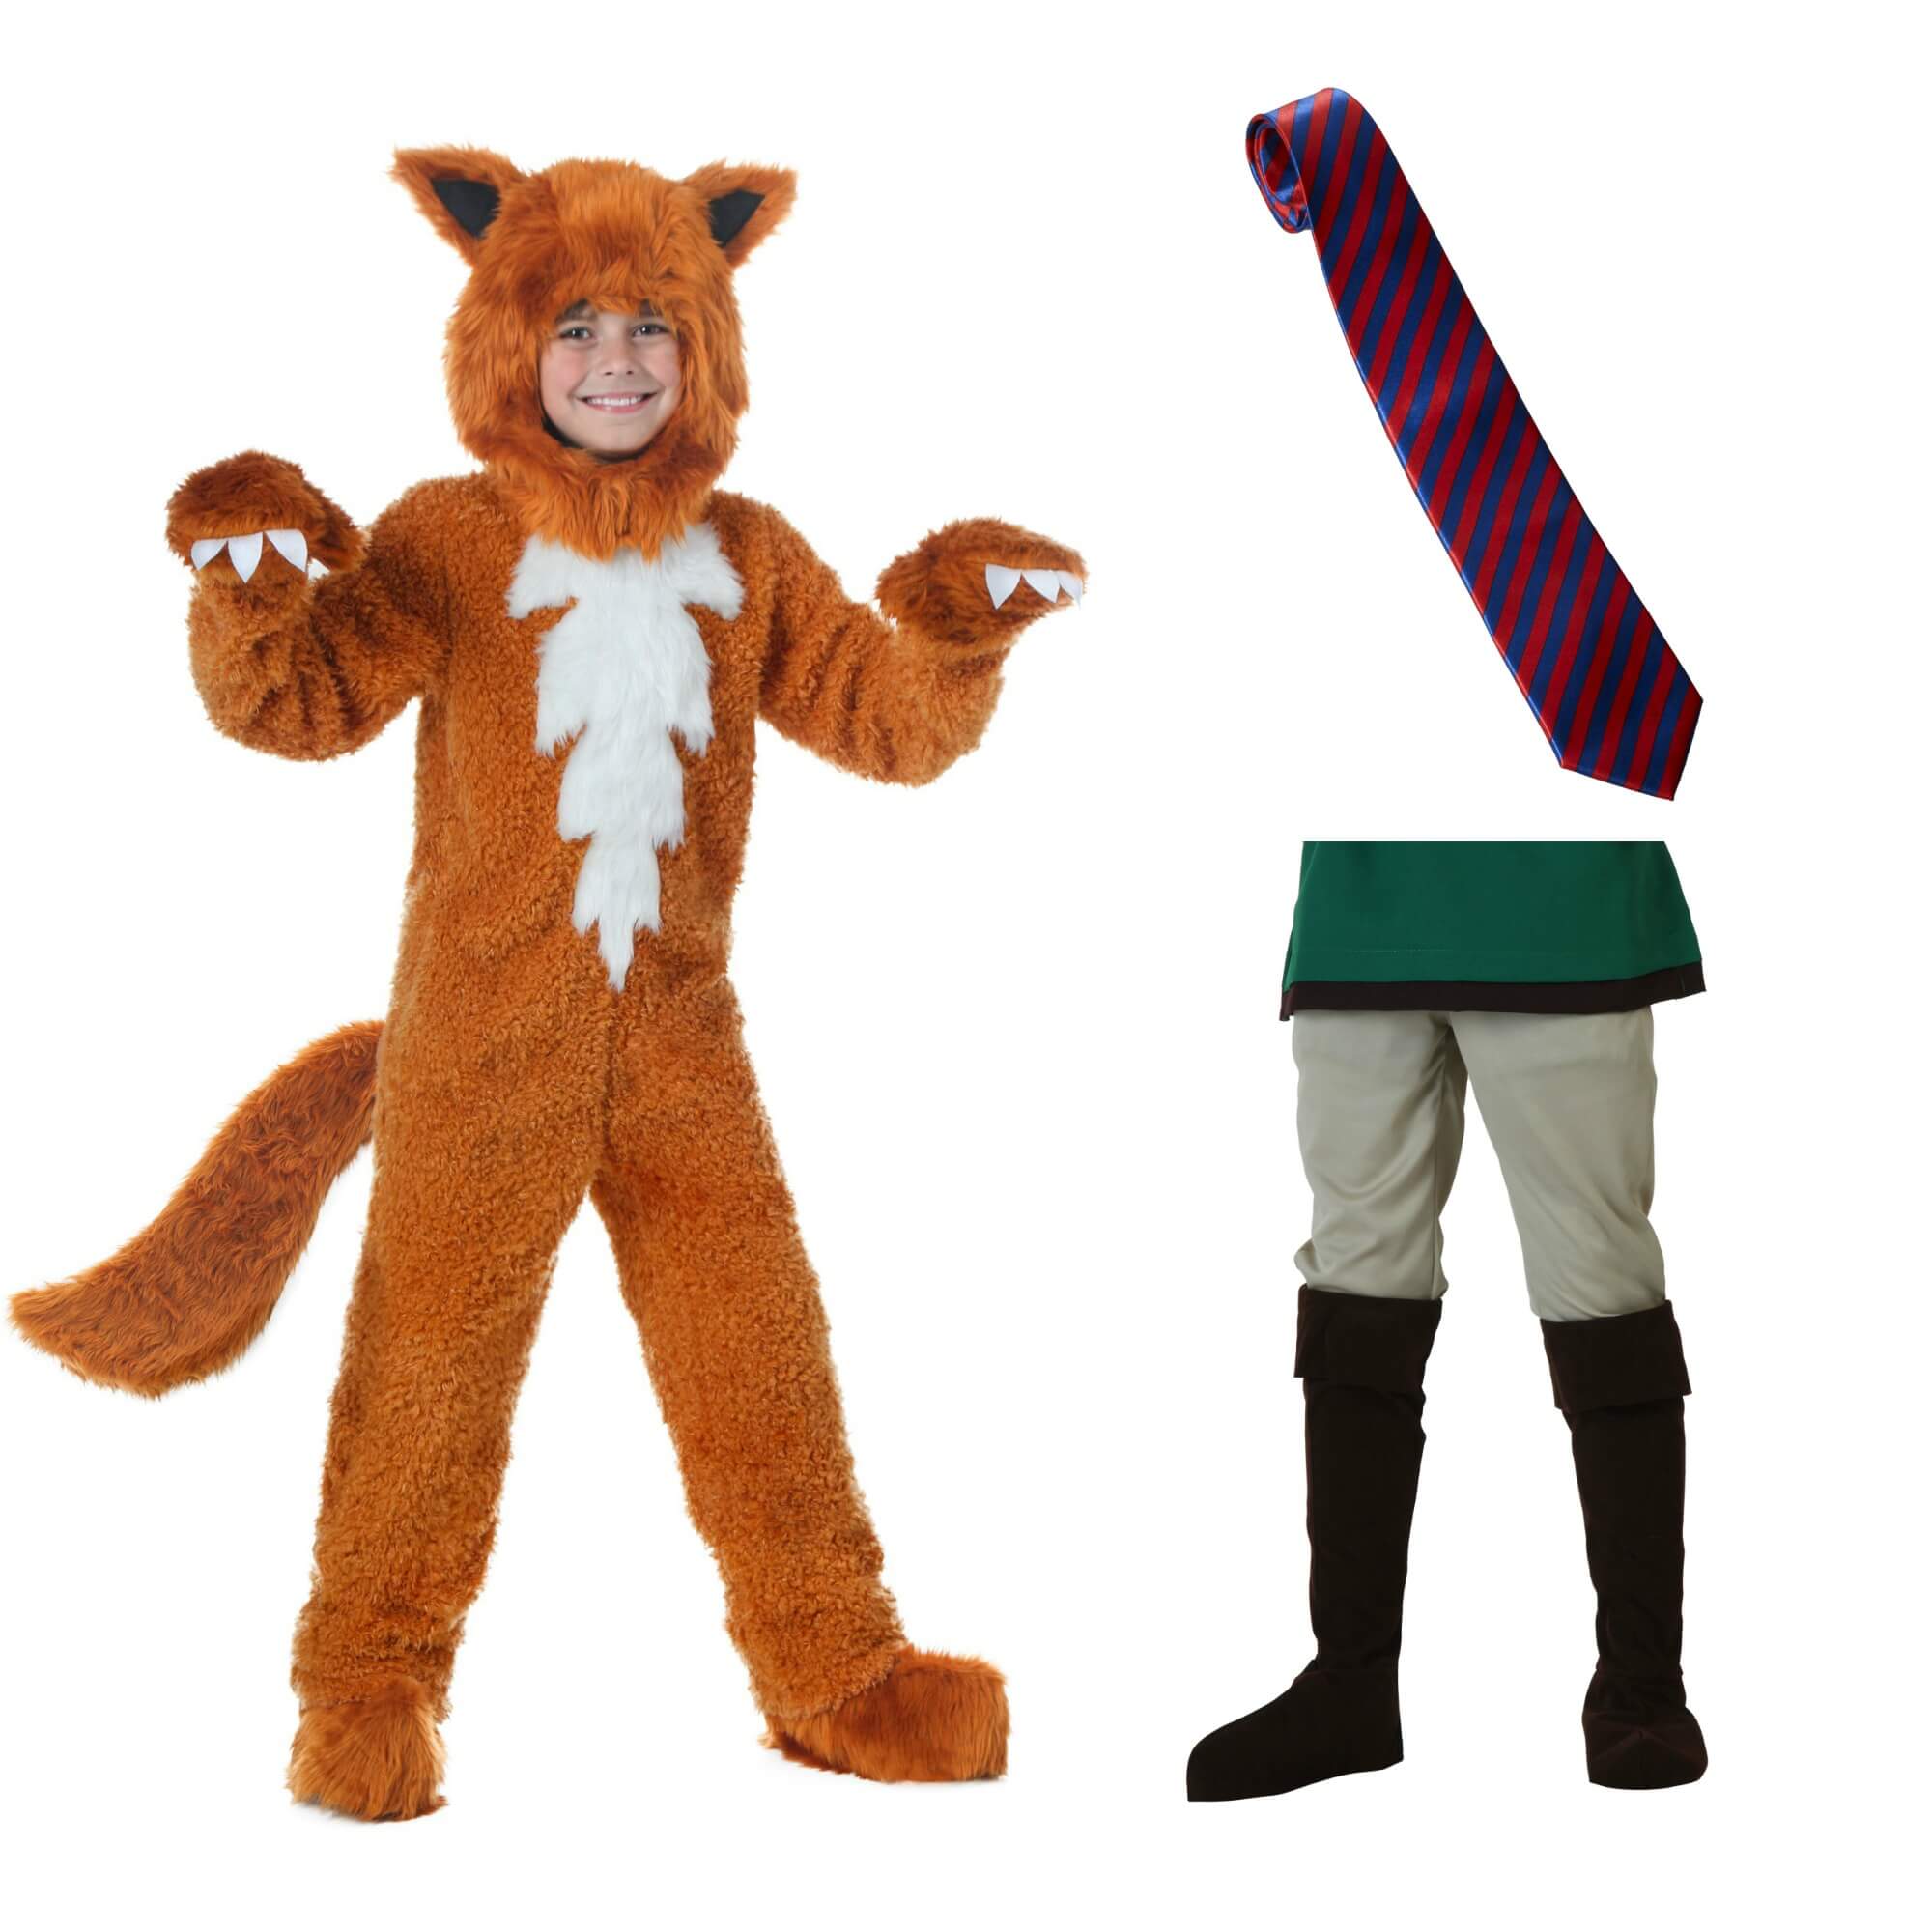 DIY Nick Wilde from Zootopia products